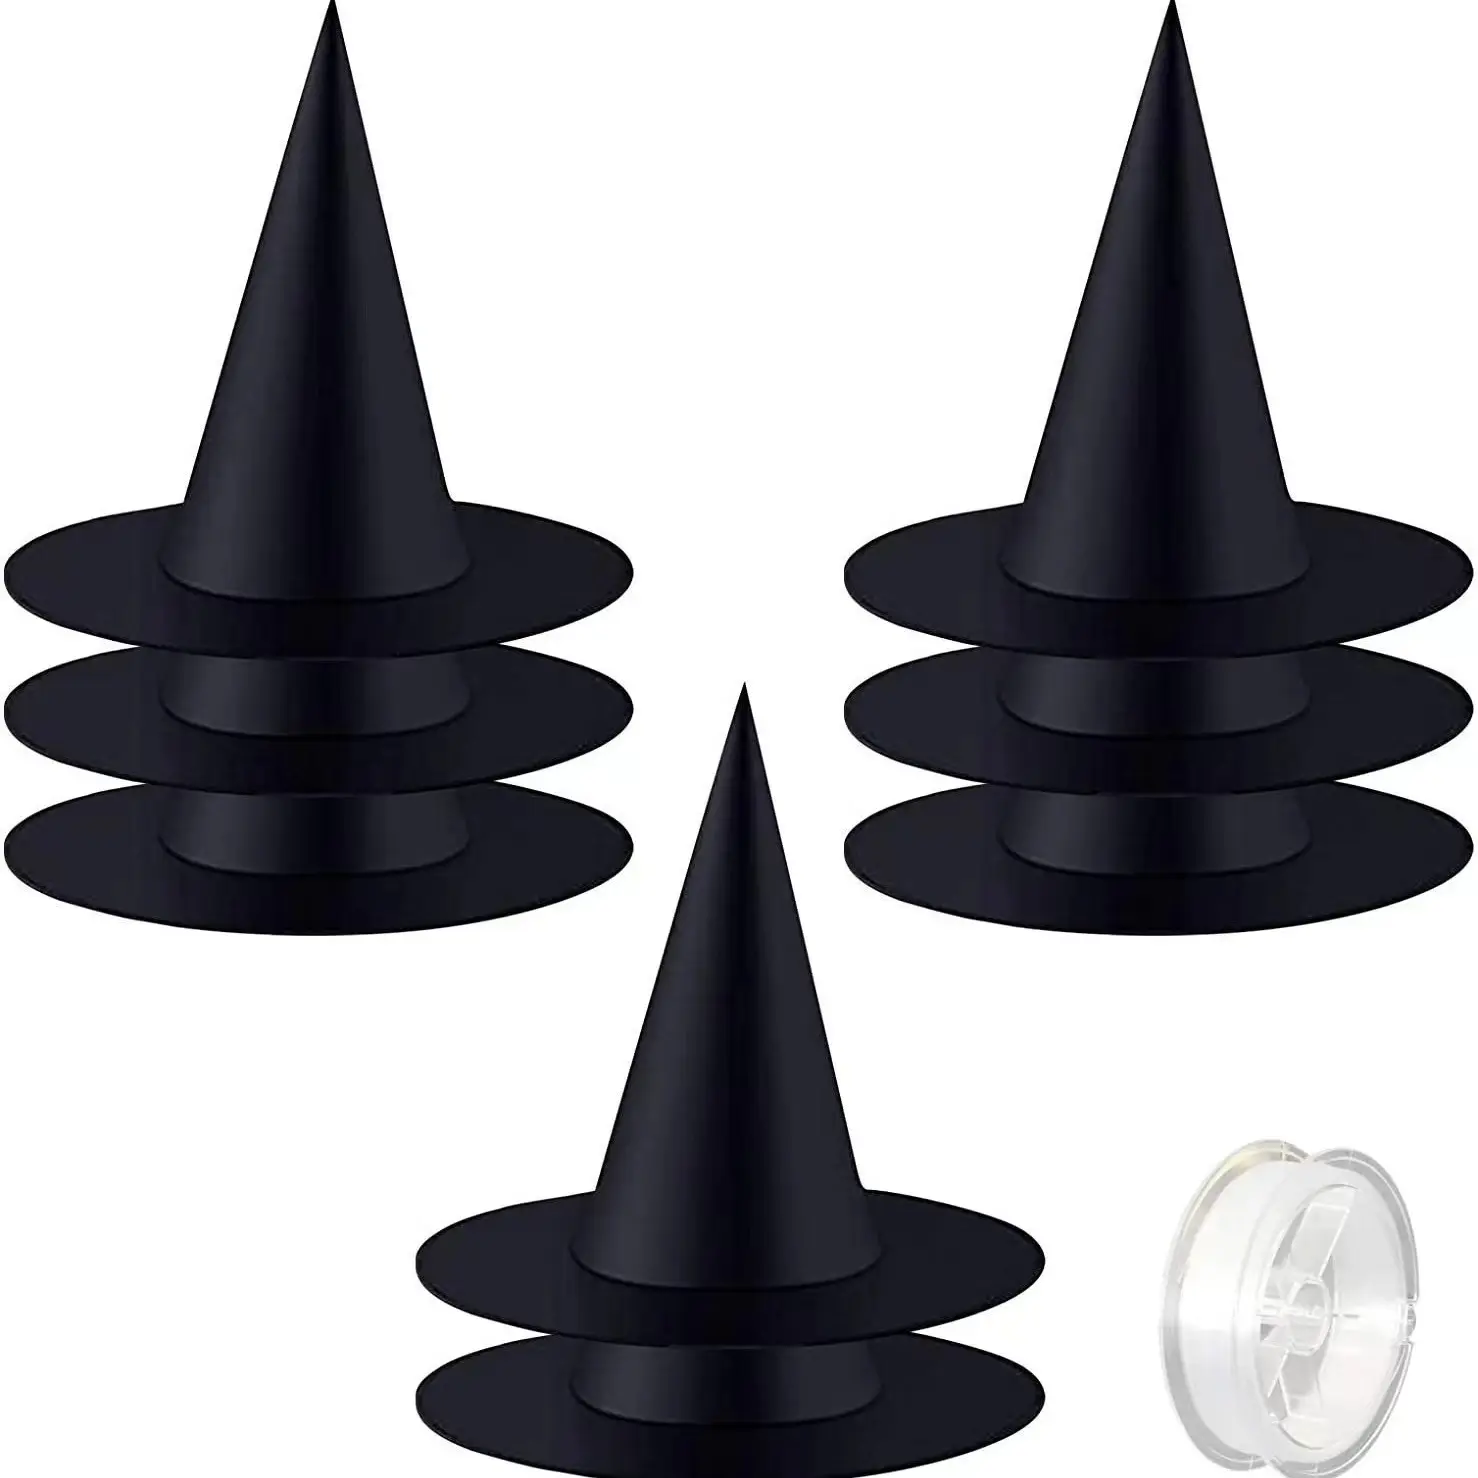 Halloween Witch Hats Party Costume Accessory witches hat Black Hanging Wizard Hat Floating Porch Yard Decoration